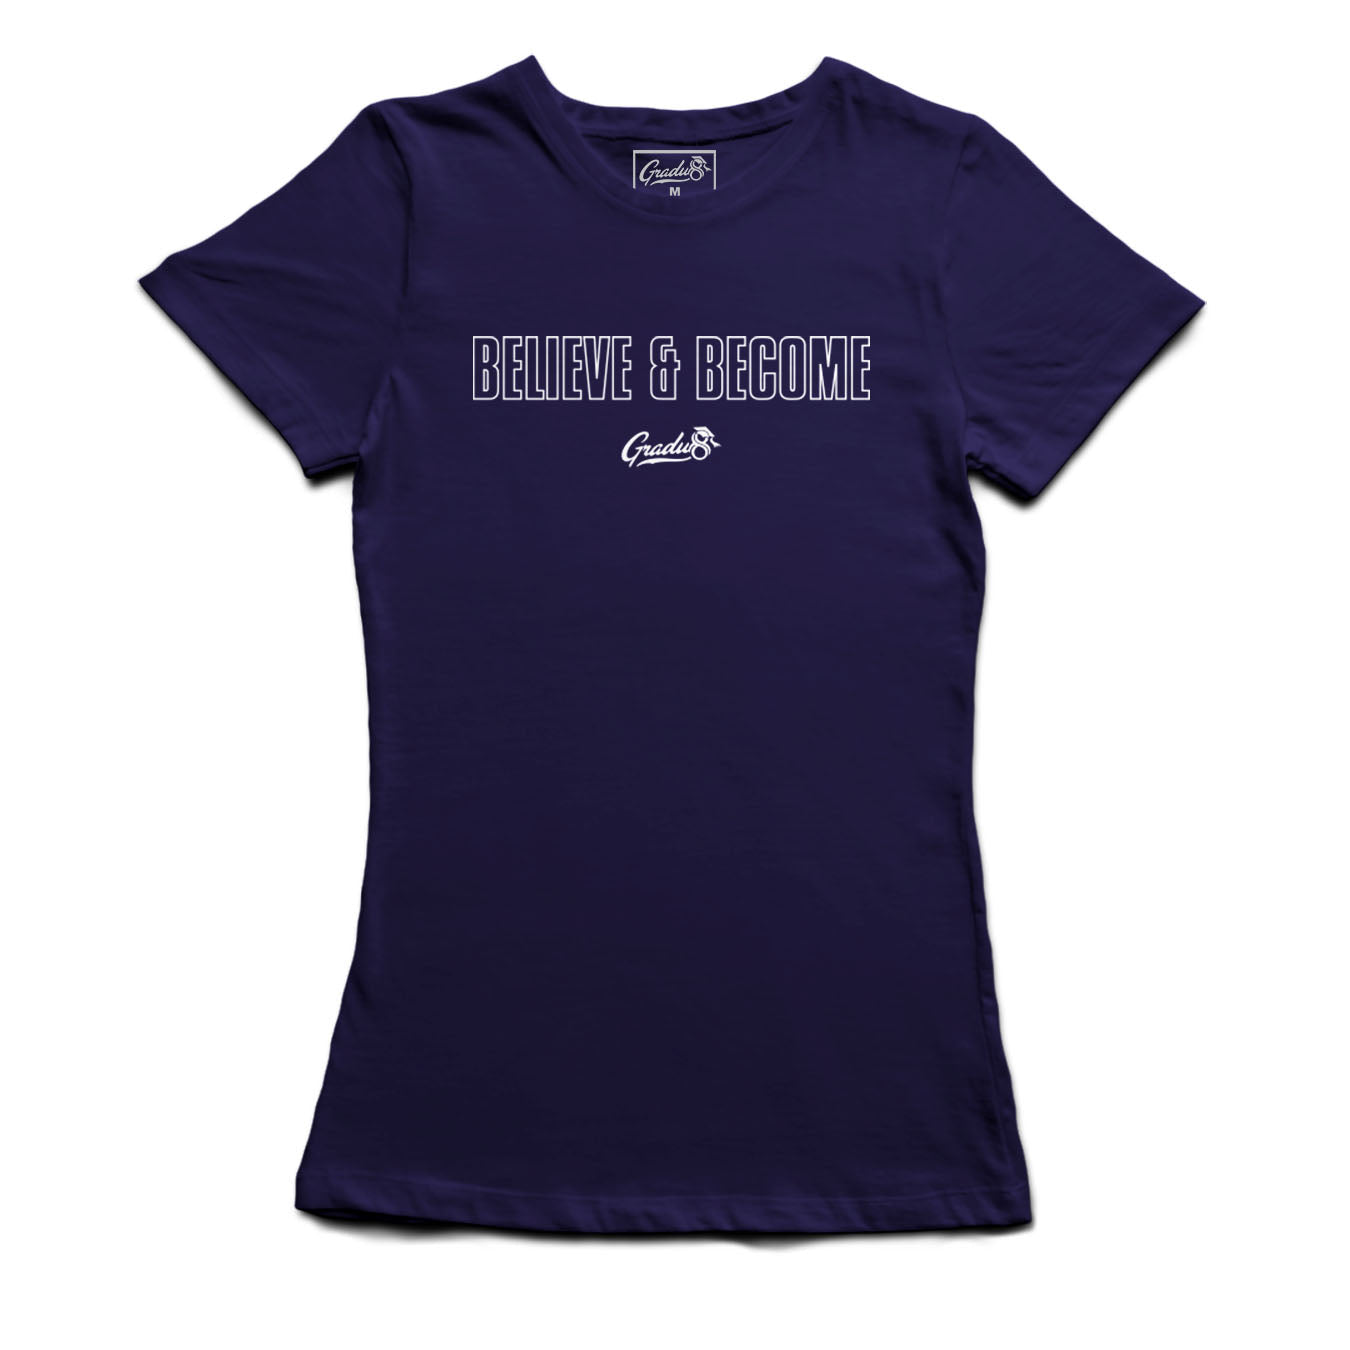 Women's Believe and Become Outline T-shirt - Navy Blue